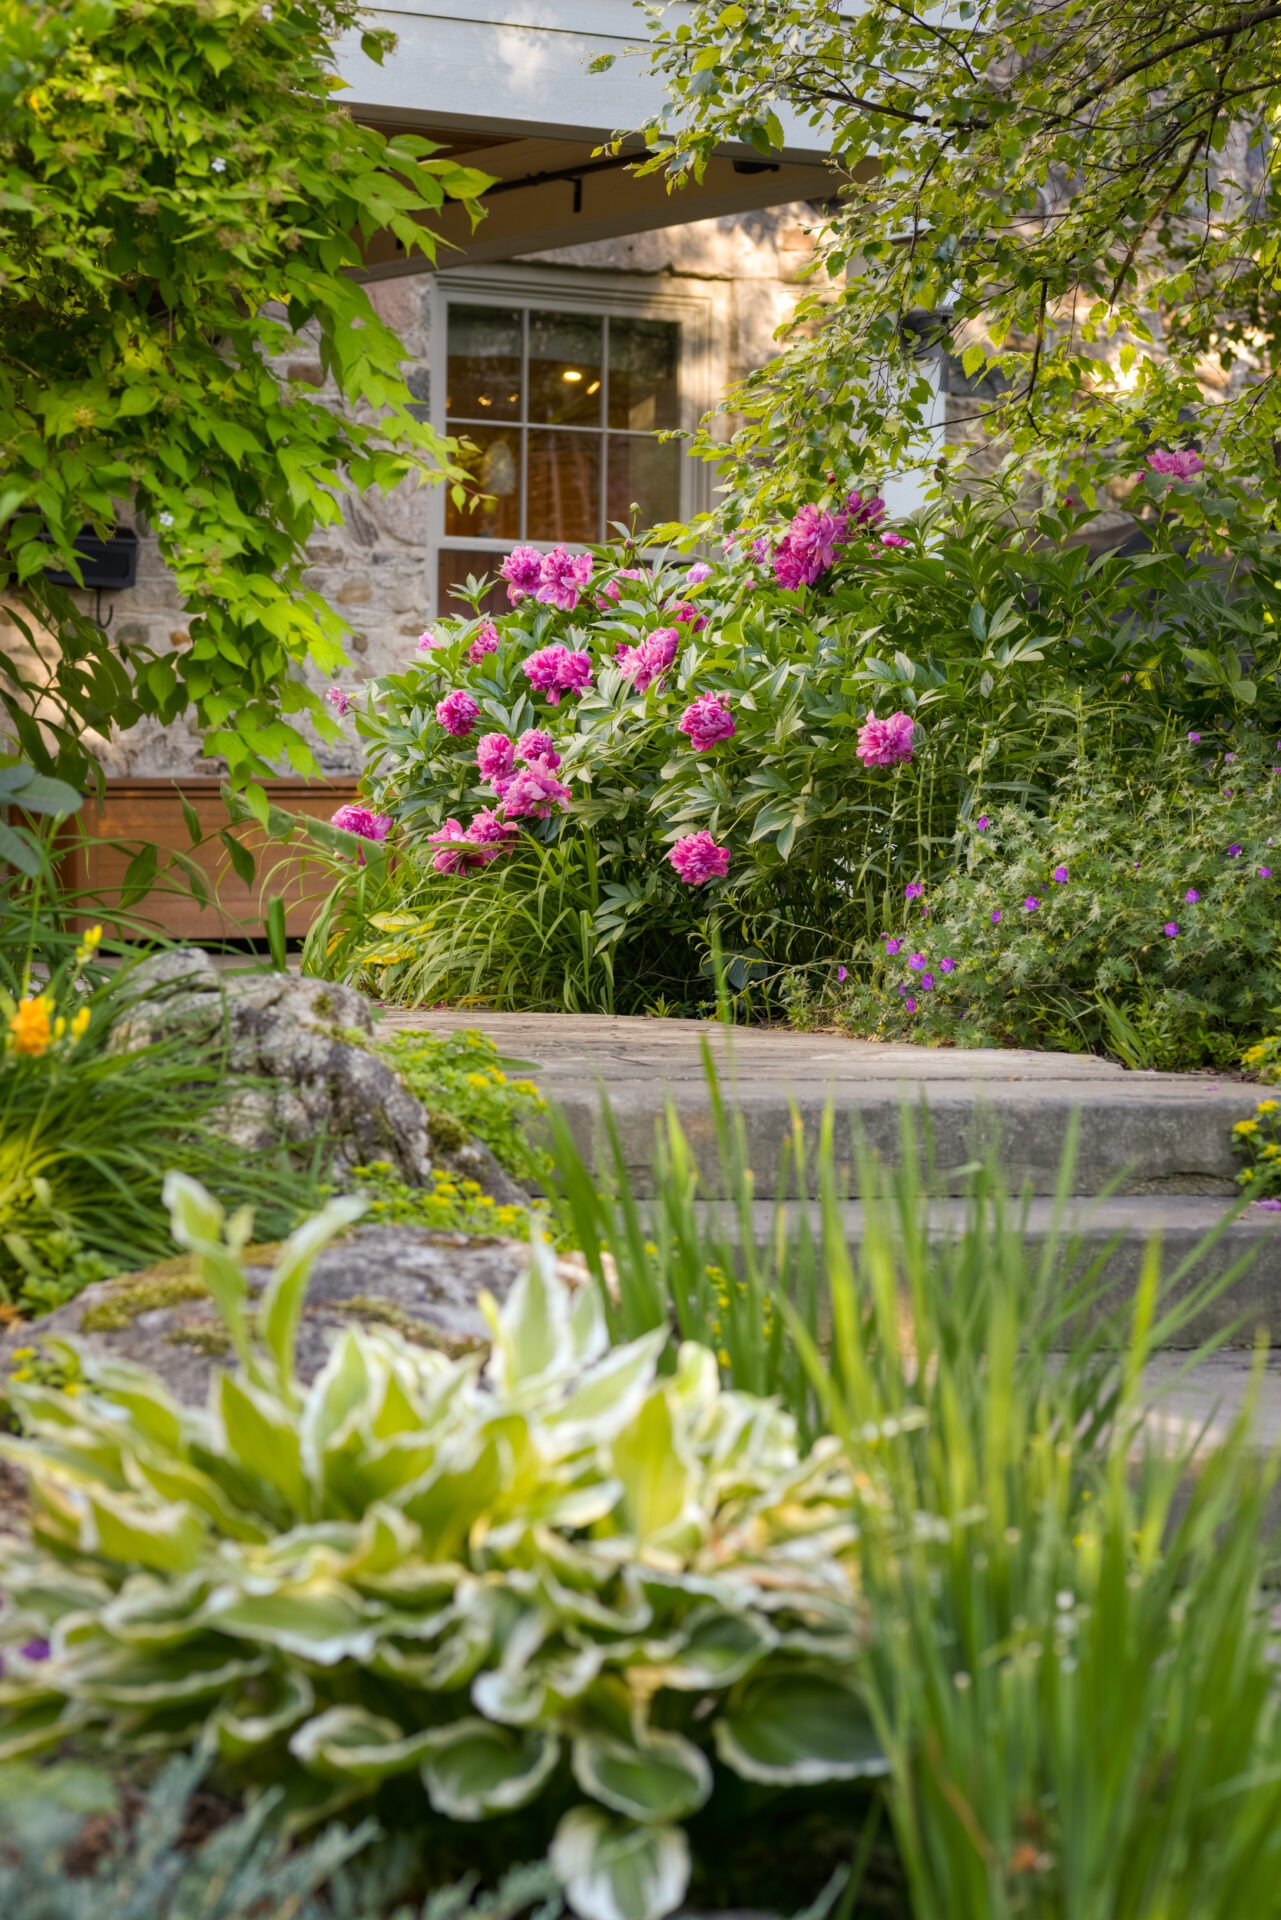 This image shows a lush garden with vibrant pink peonies, green foliage, variegated hostas, and a stone house with a window partially visible.